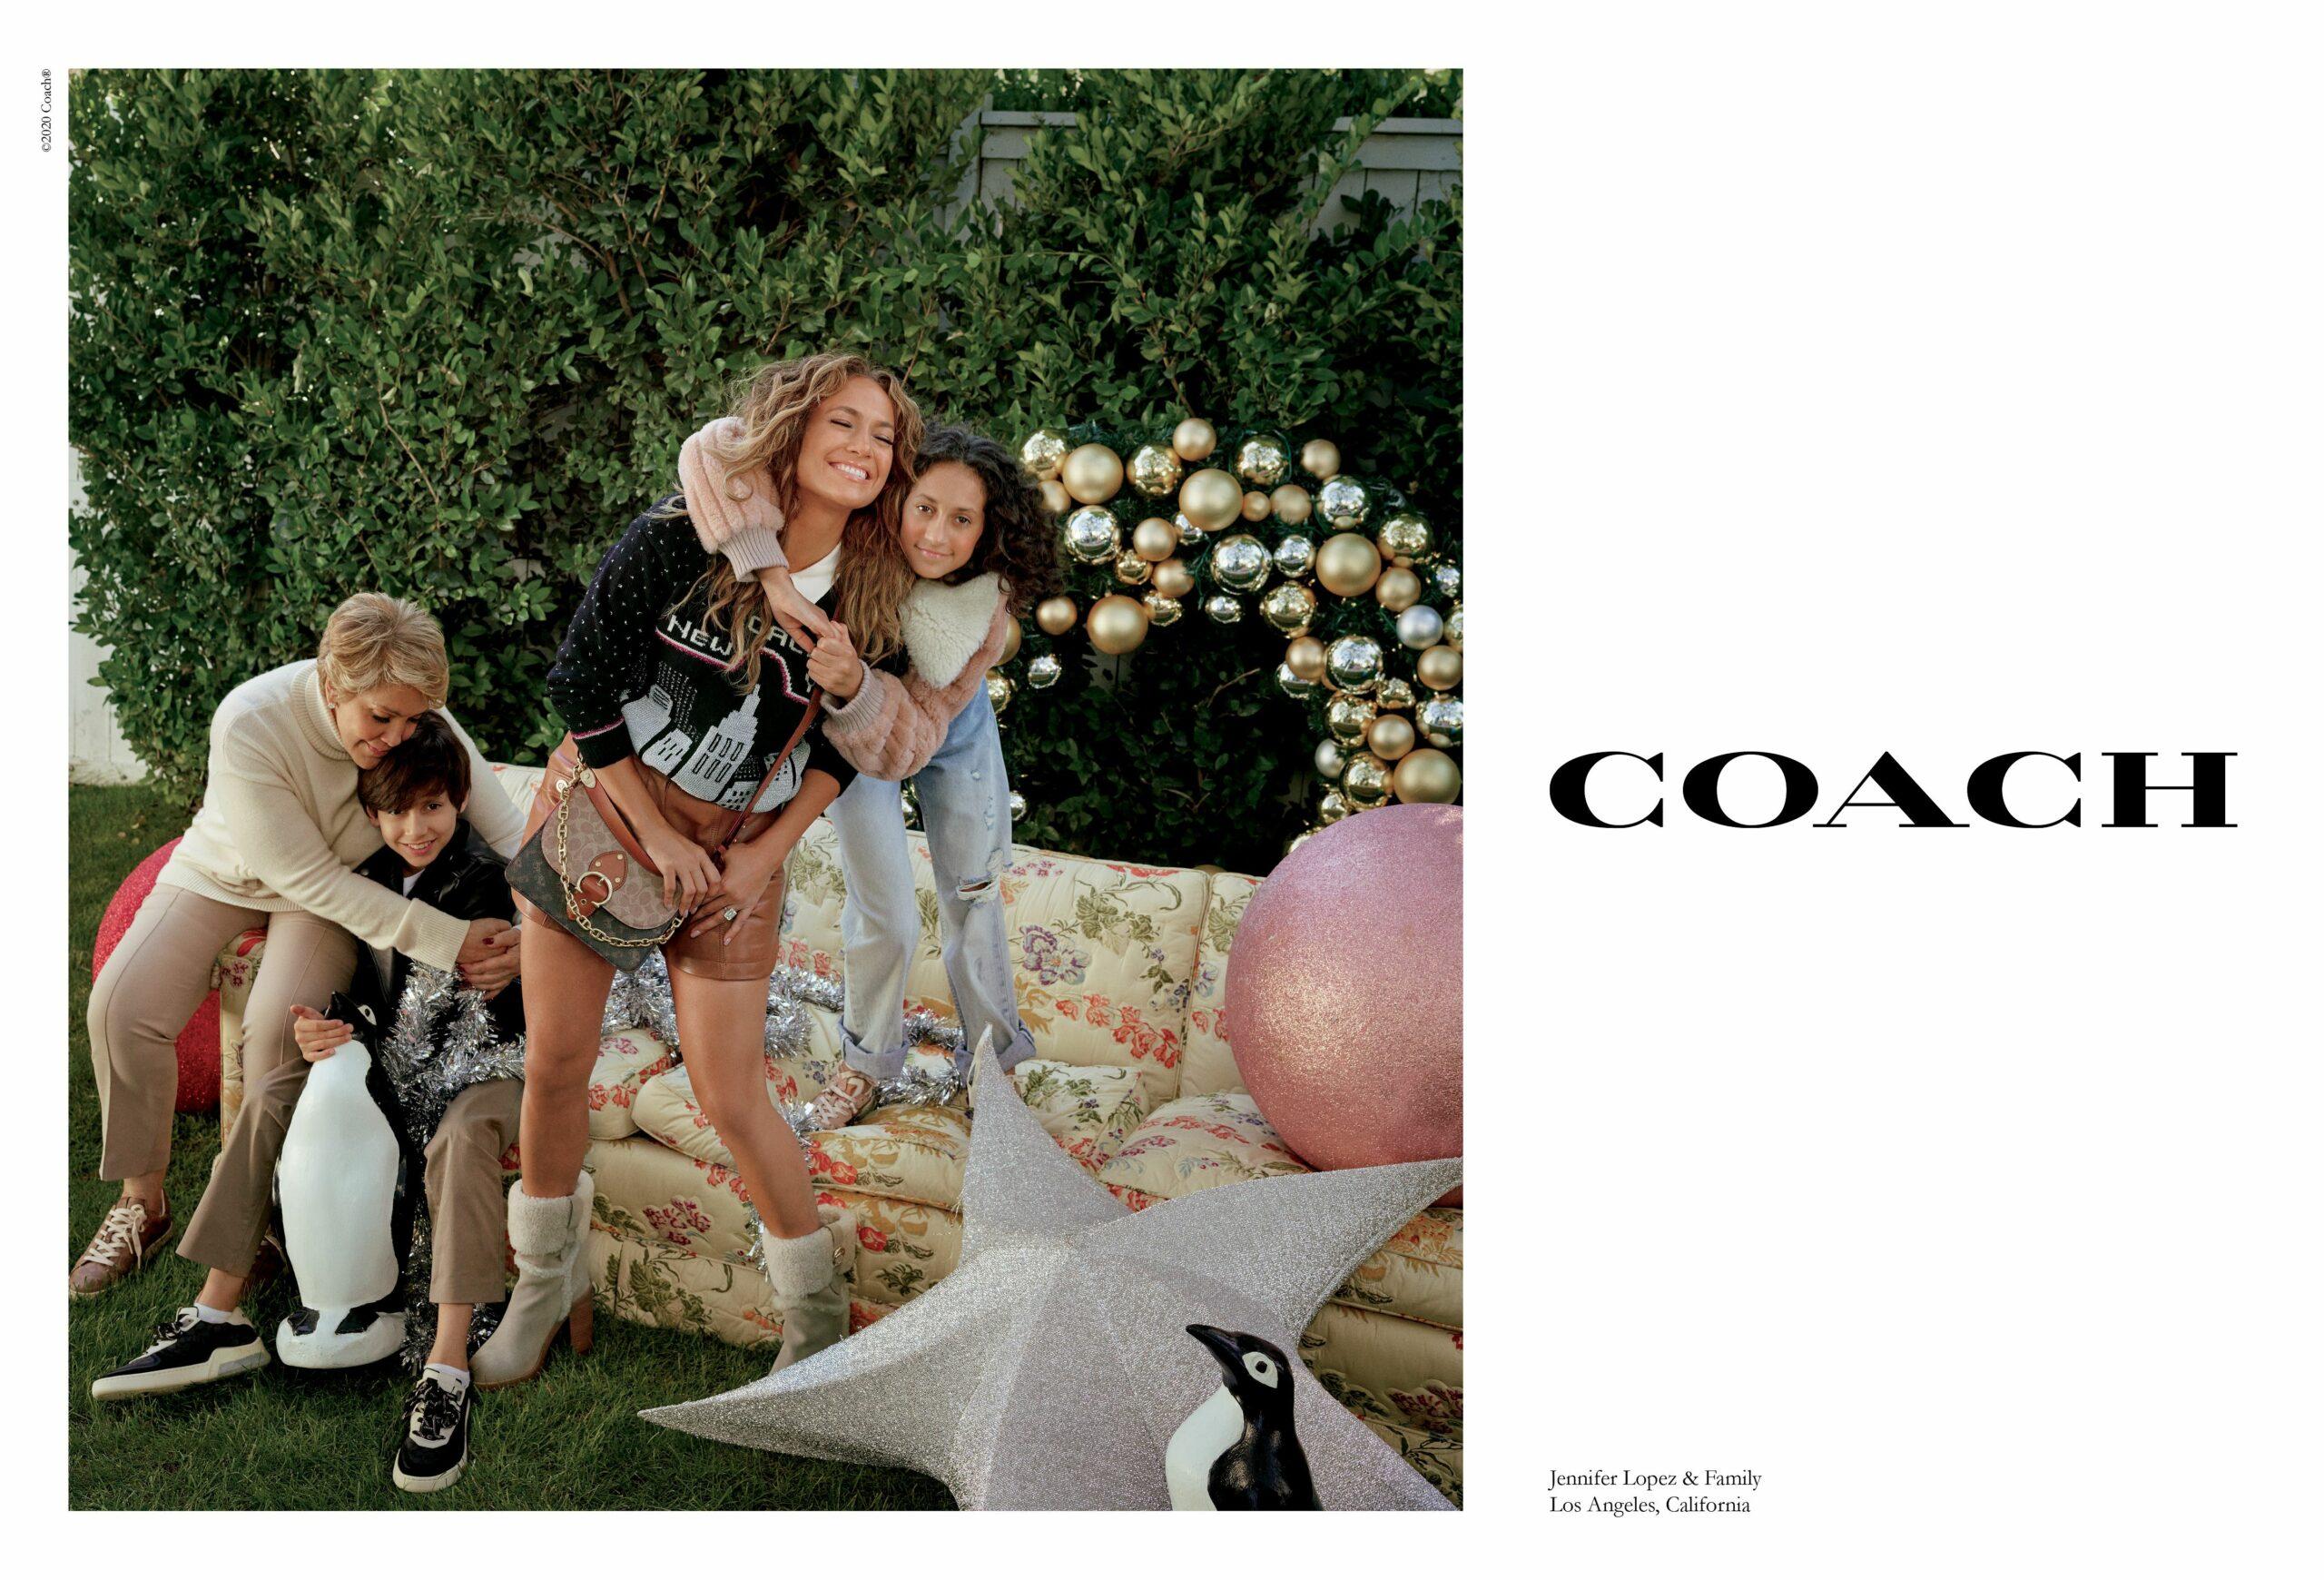 Jennifer Lopez Appears With Kids In Coach Holiday Campaign